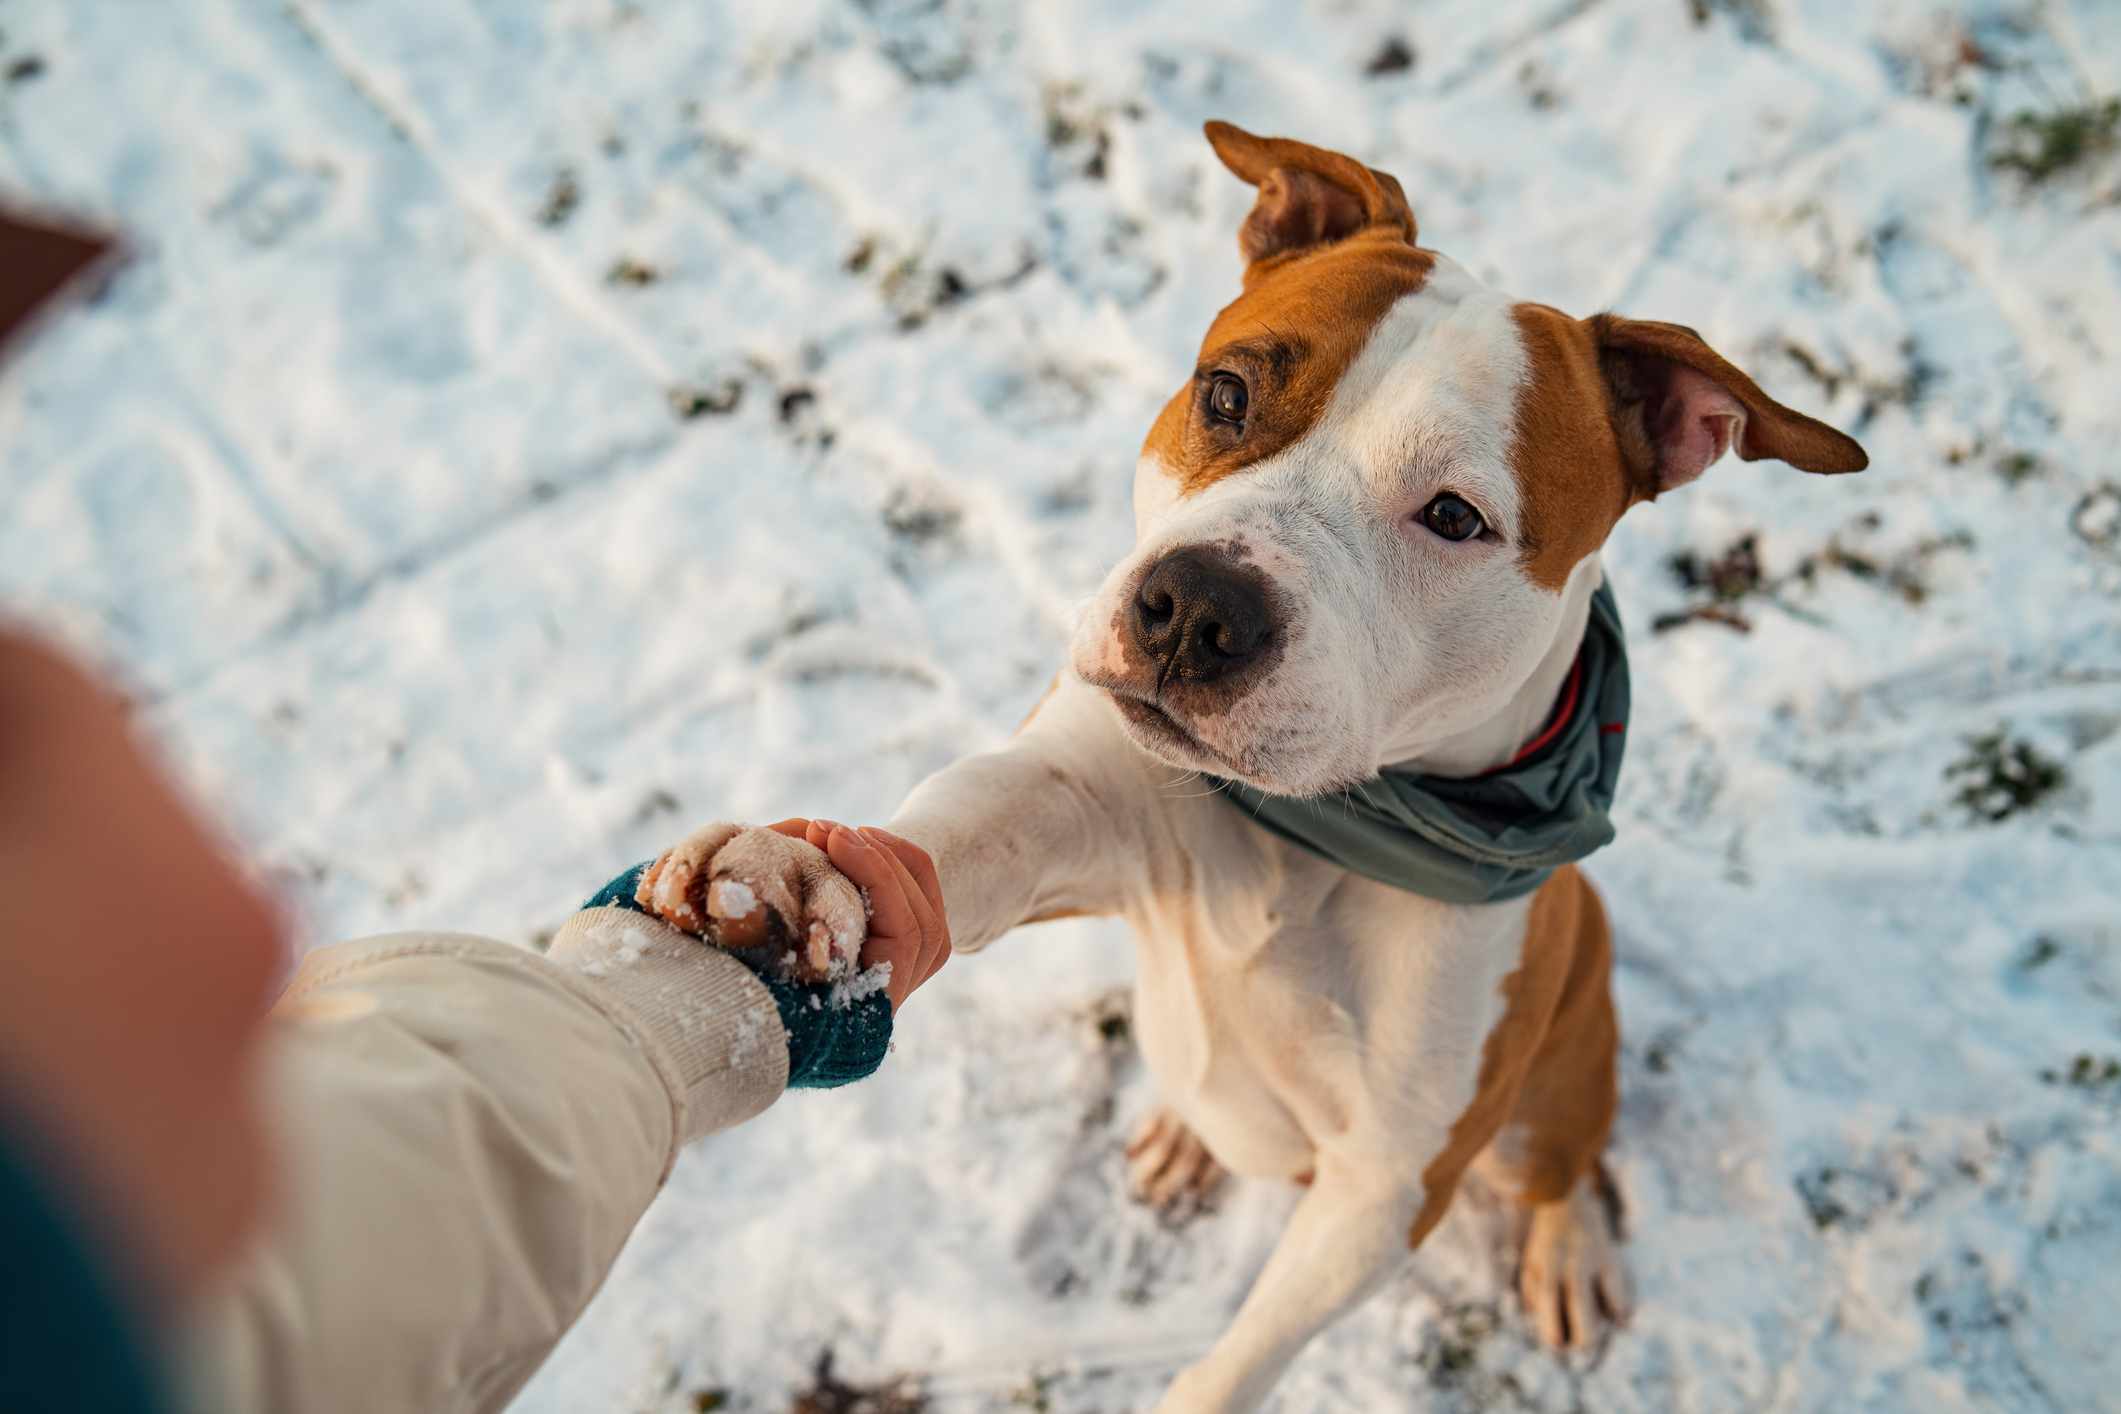 Holding a Staffordshire terrier’s paw in the snow